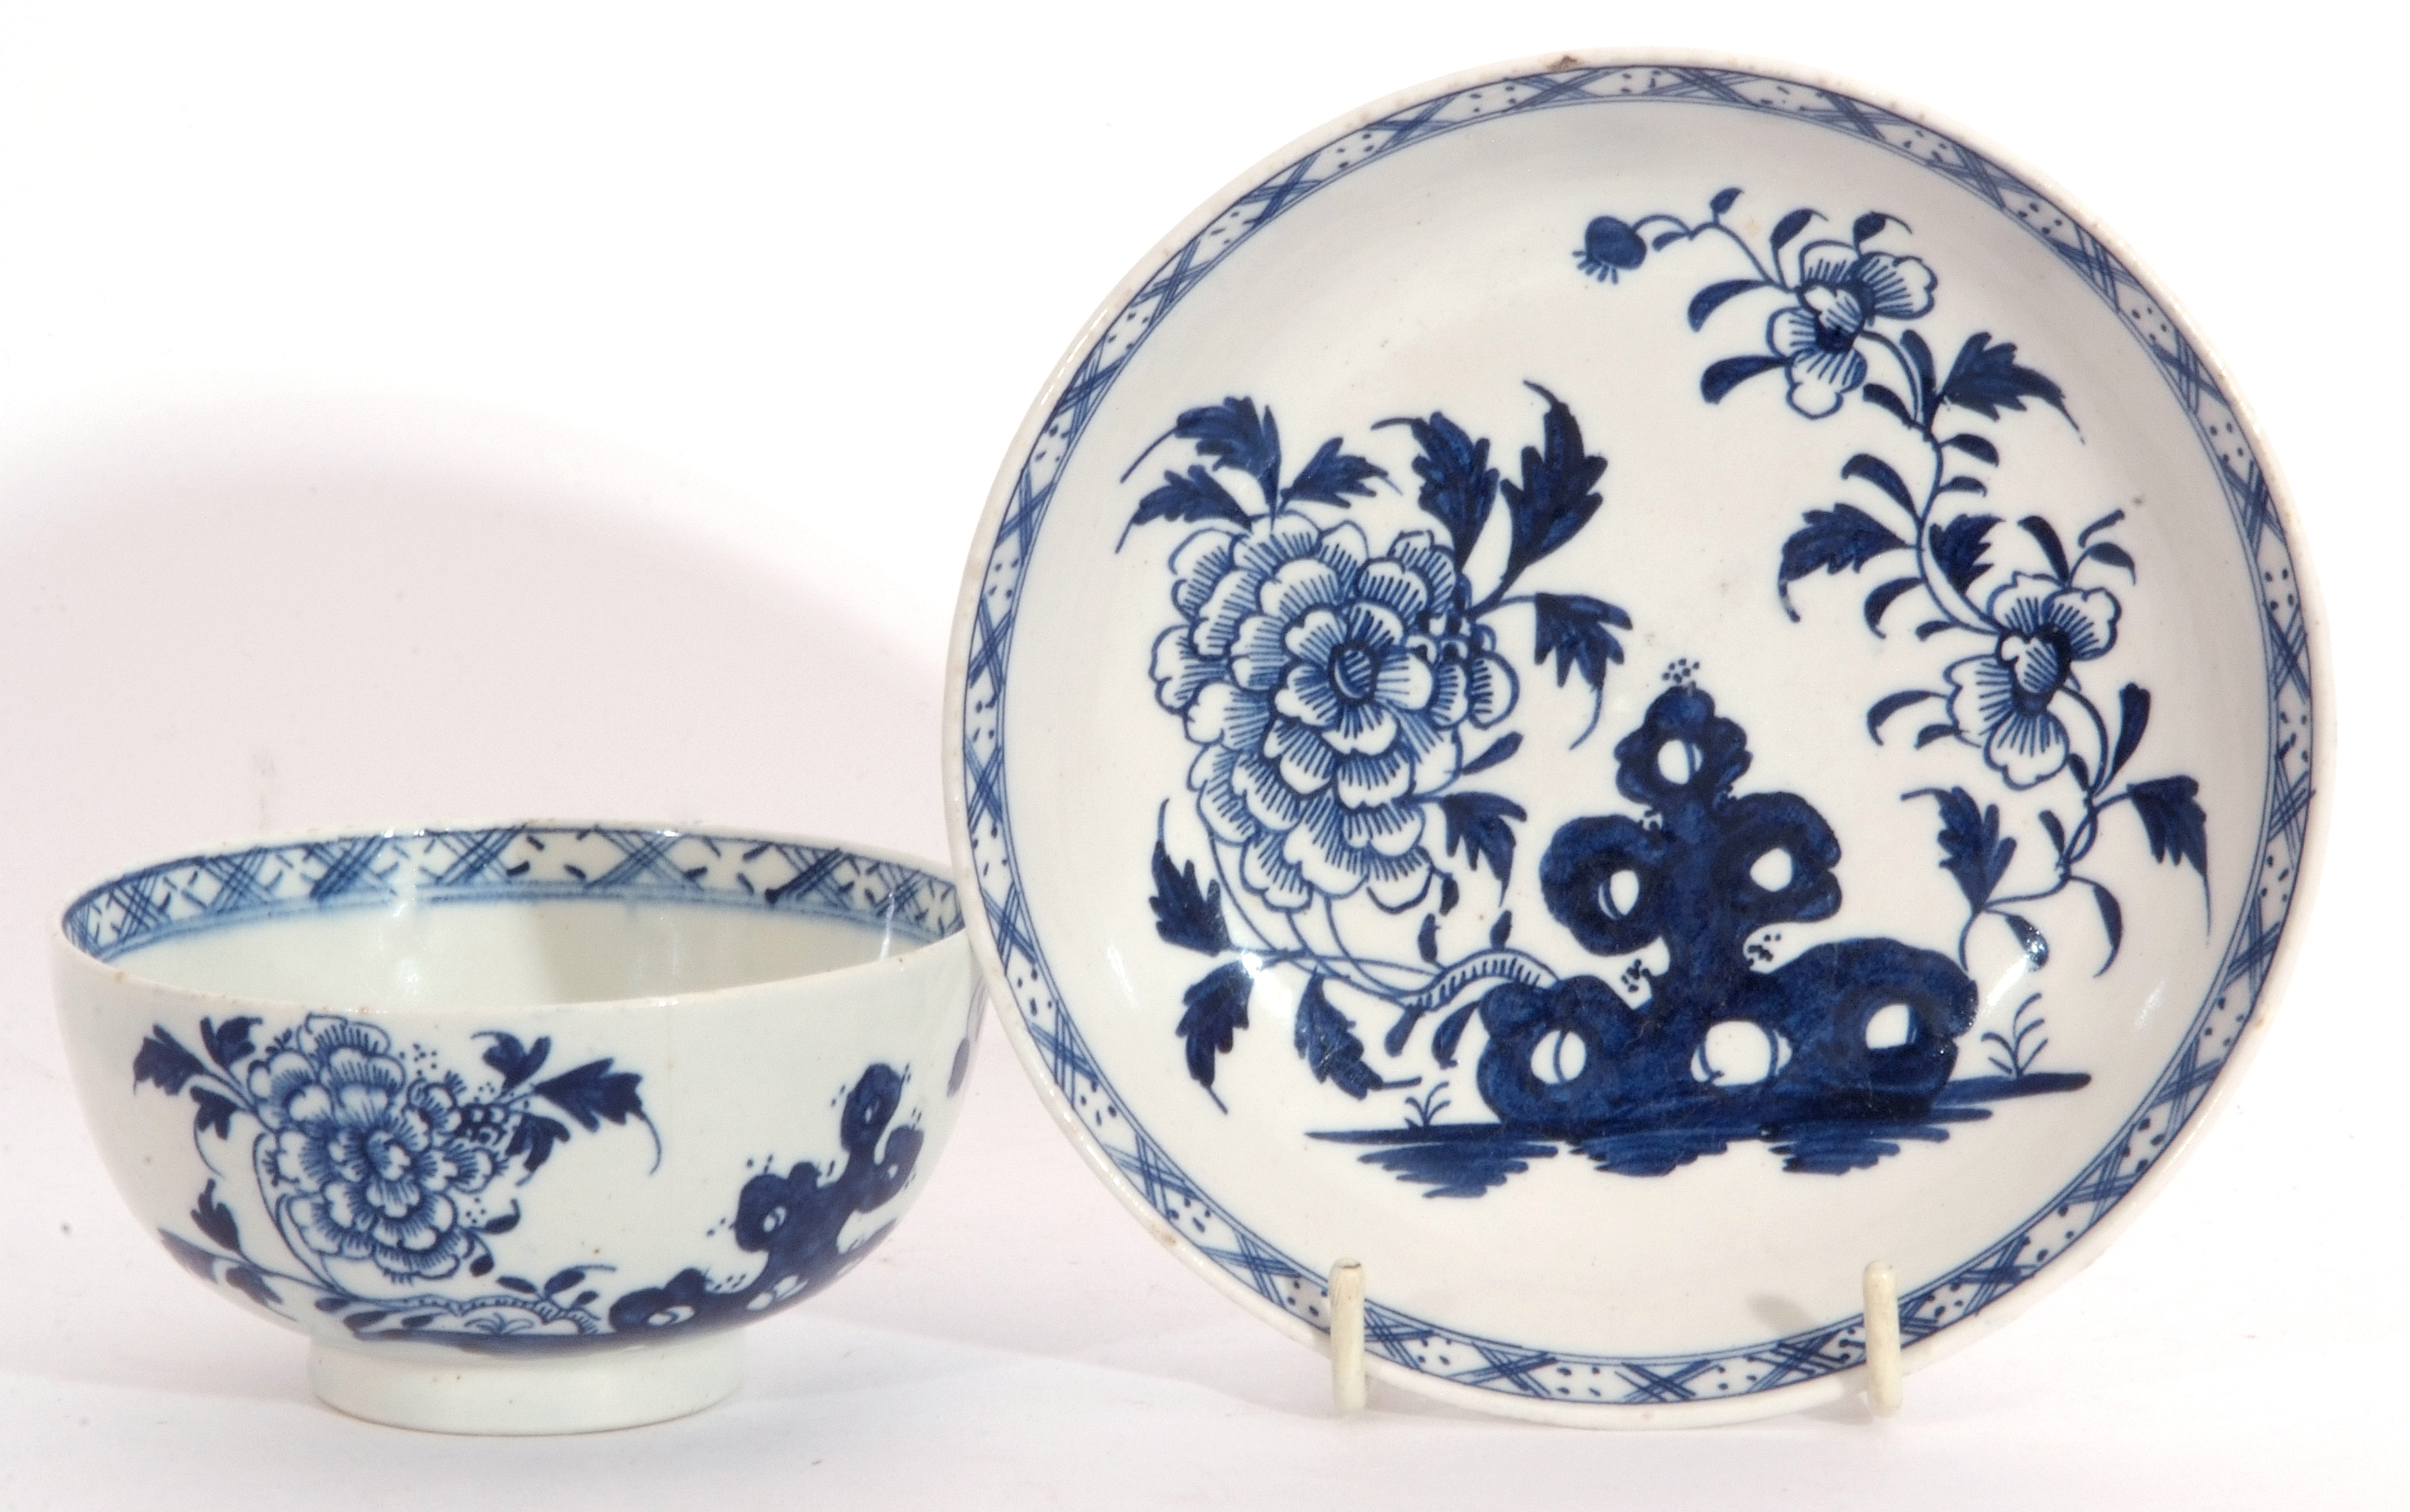 Large Lowestoft porcelain tea bowl and saucer decorated in underglaze blue with flowers and rock - Image 3 of 9